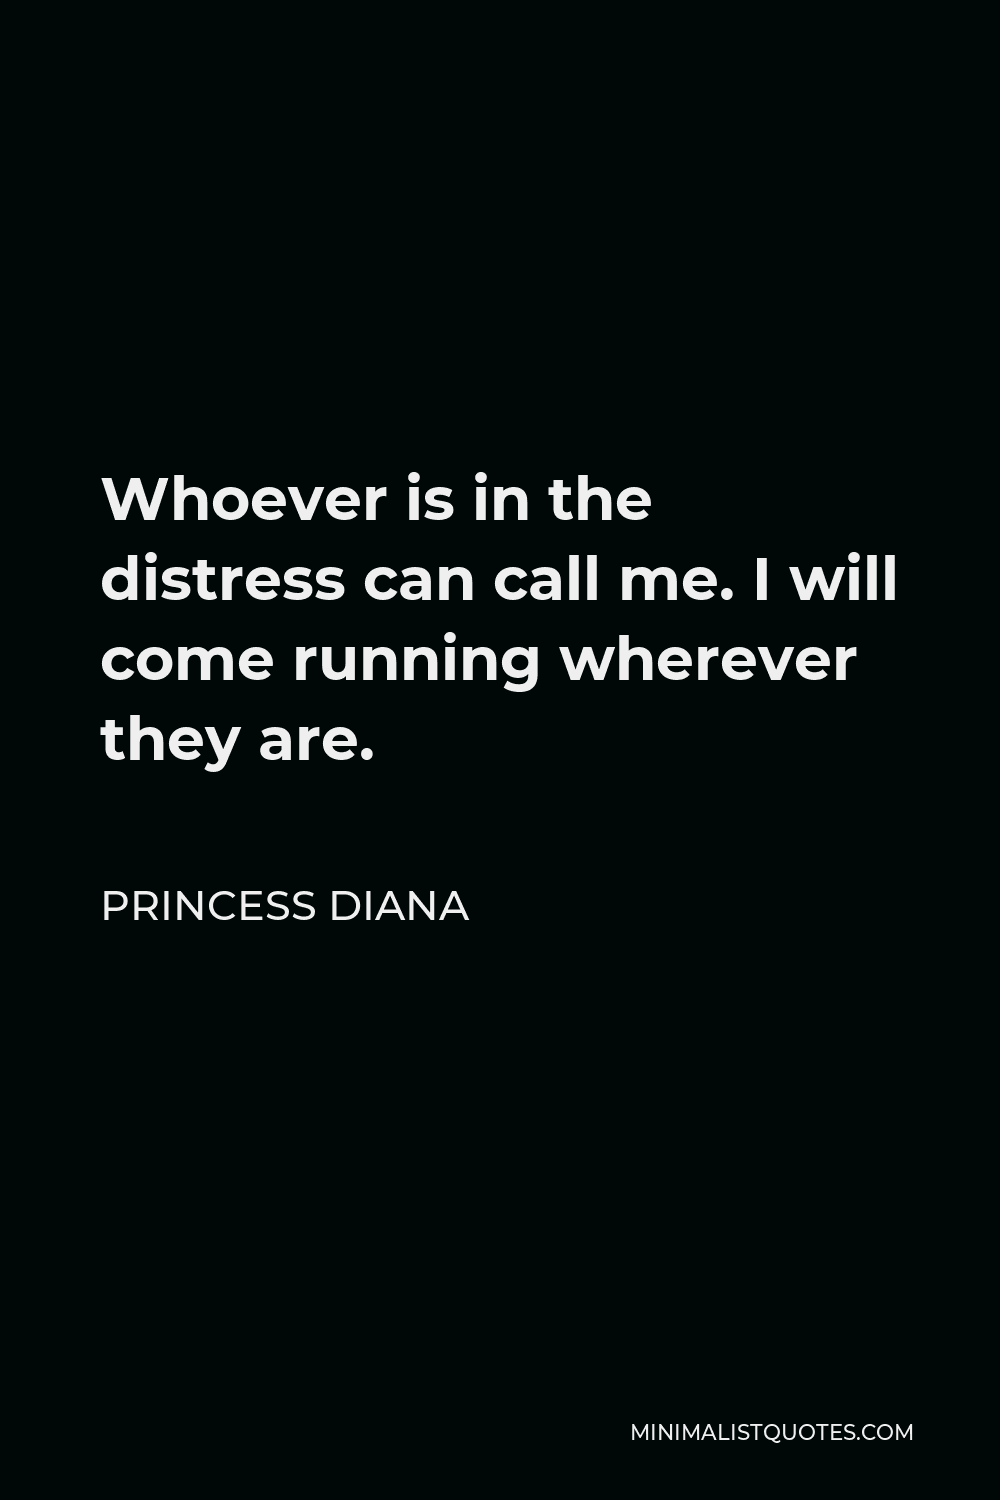 Princess Diana Quote - Whoever is in the distress can call me. I will come running wherever they are.